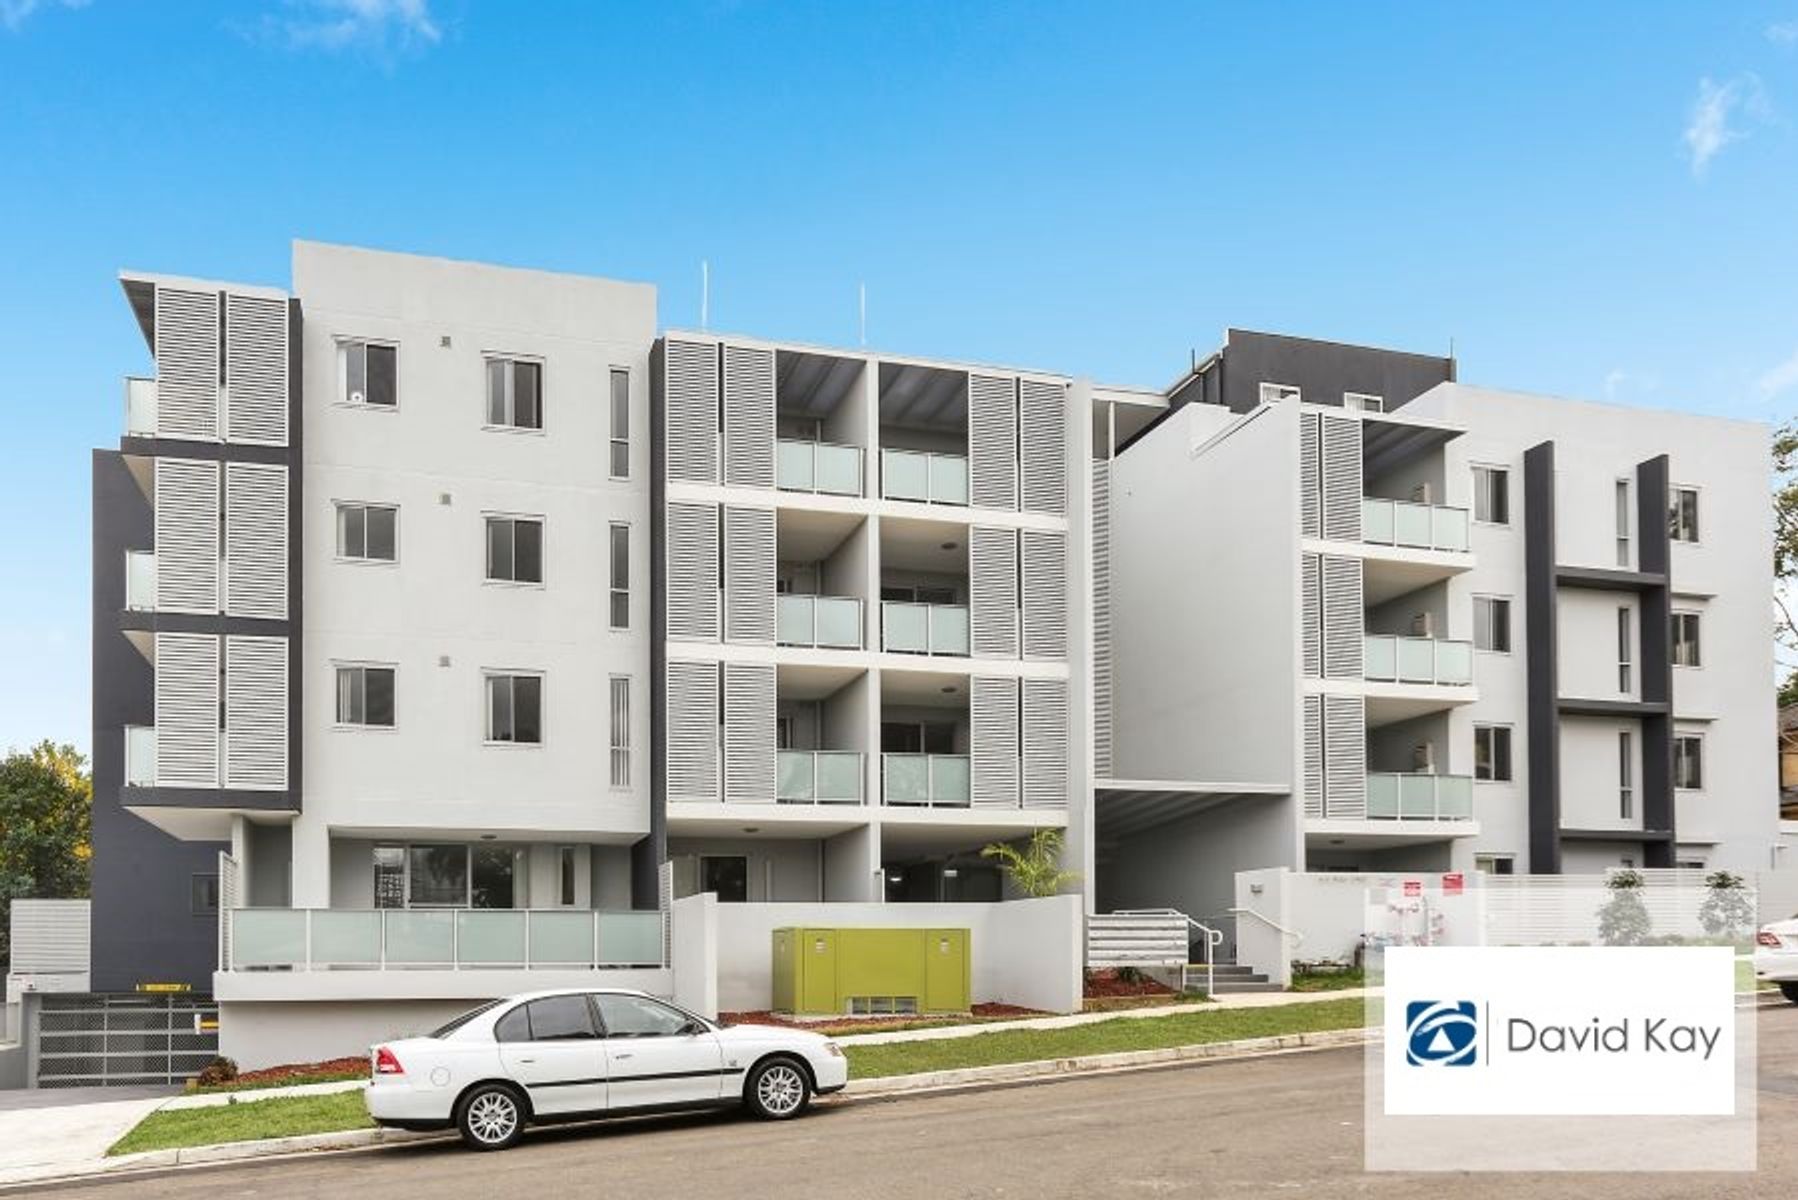 1/14-18 Peggy Street, Mays Hill, NSW 2145